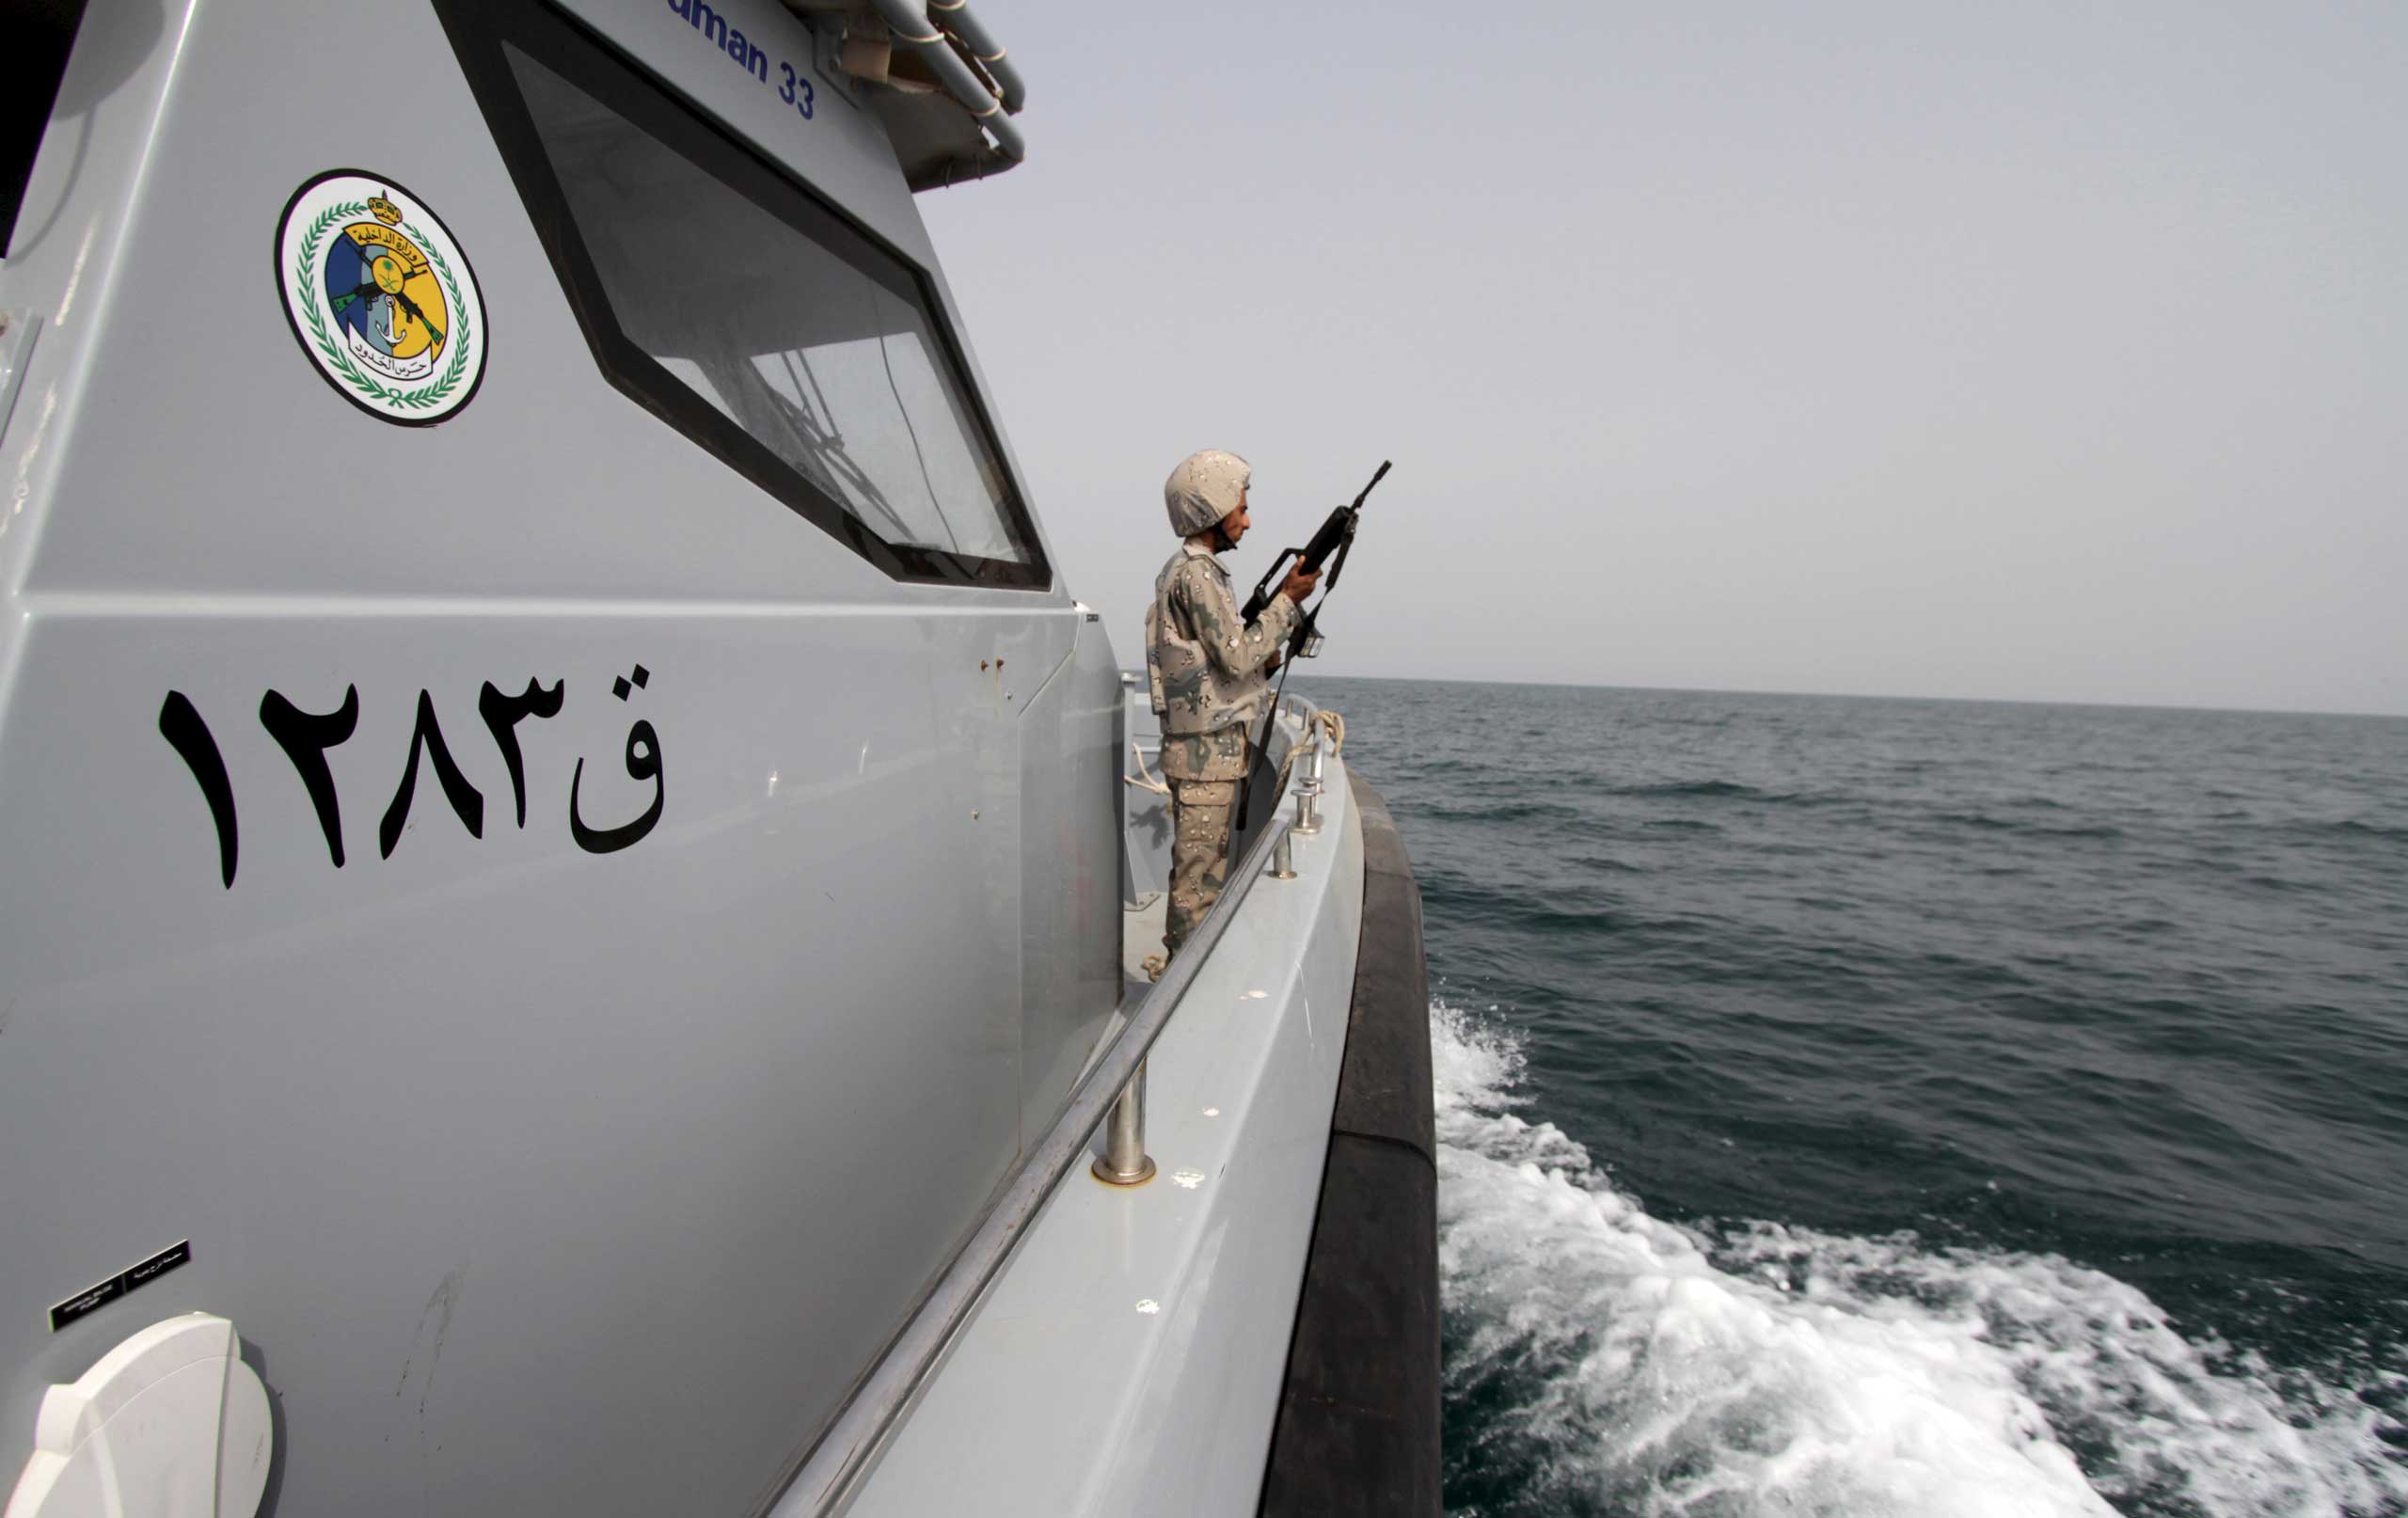 A Saudi border guard watches as he stands in a boat off the coast of the Red Sea on Saudi Arabia's maritime border with Yemen, near Jizan April 8, 2015. (Faisal Nasser—Reuters)